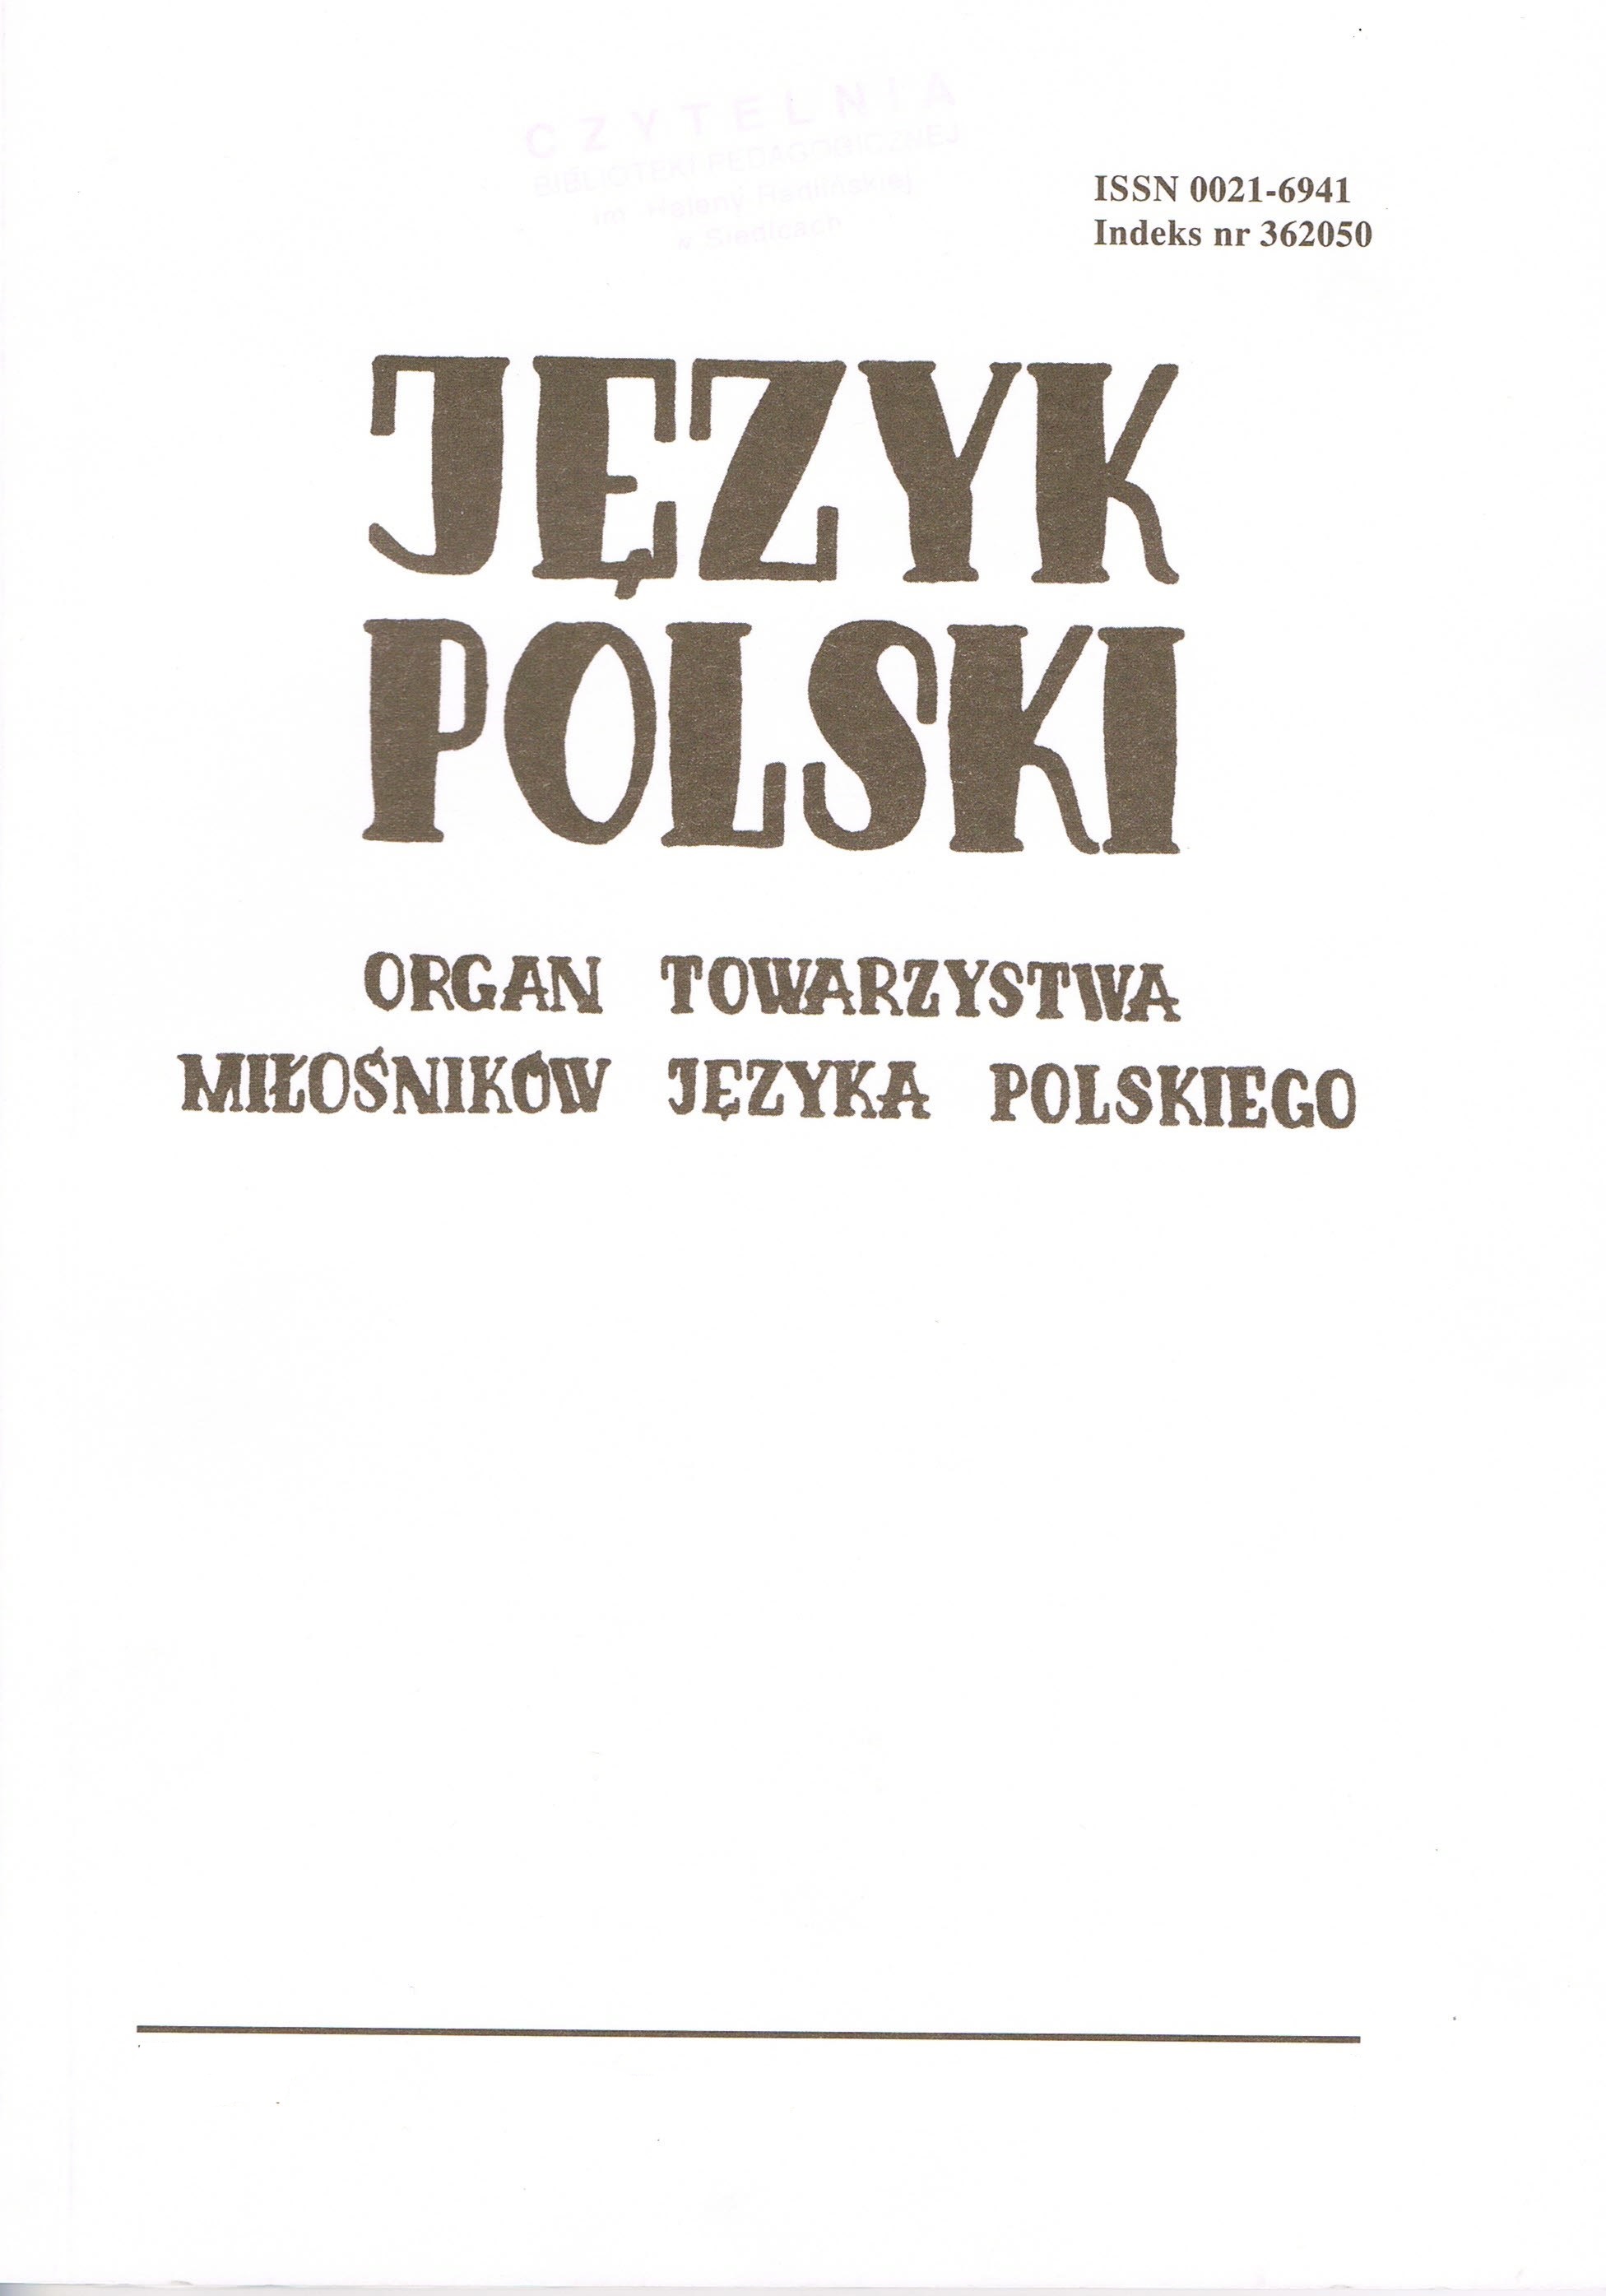 Publishing activity of the Society of Friends of the Polish Language Cover Image